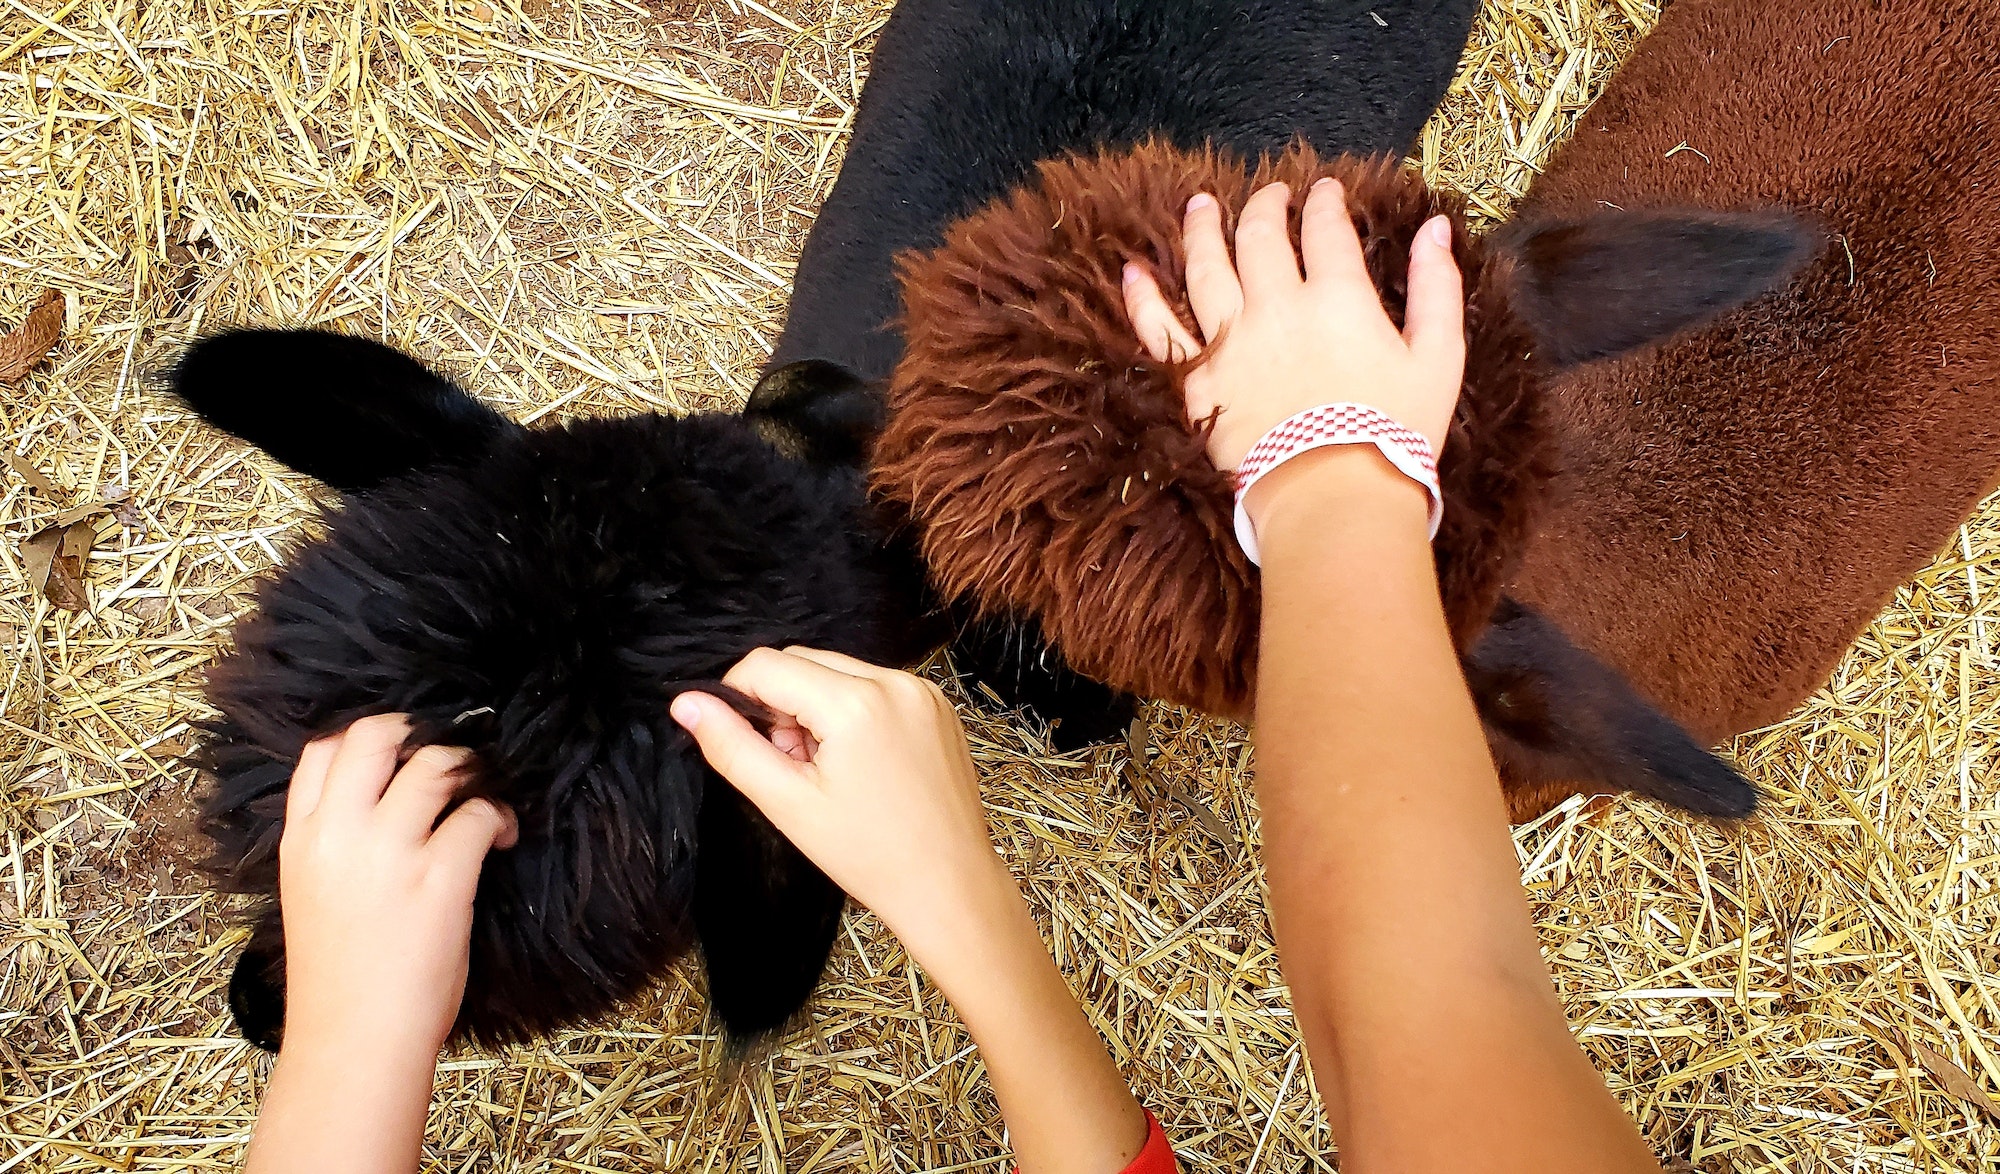 Kids being kids with no fear of animals pet the farm creatures on the head with hands.